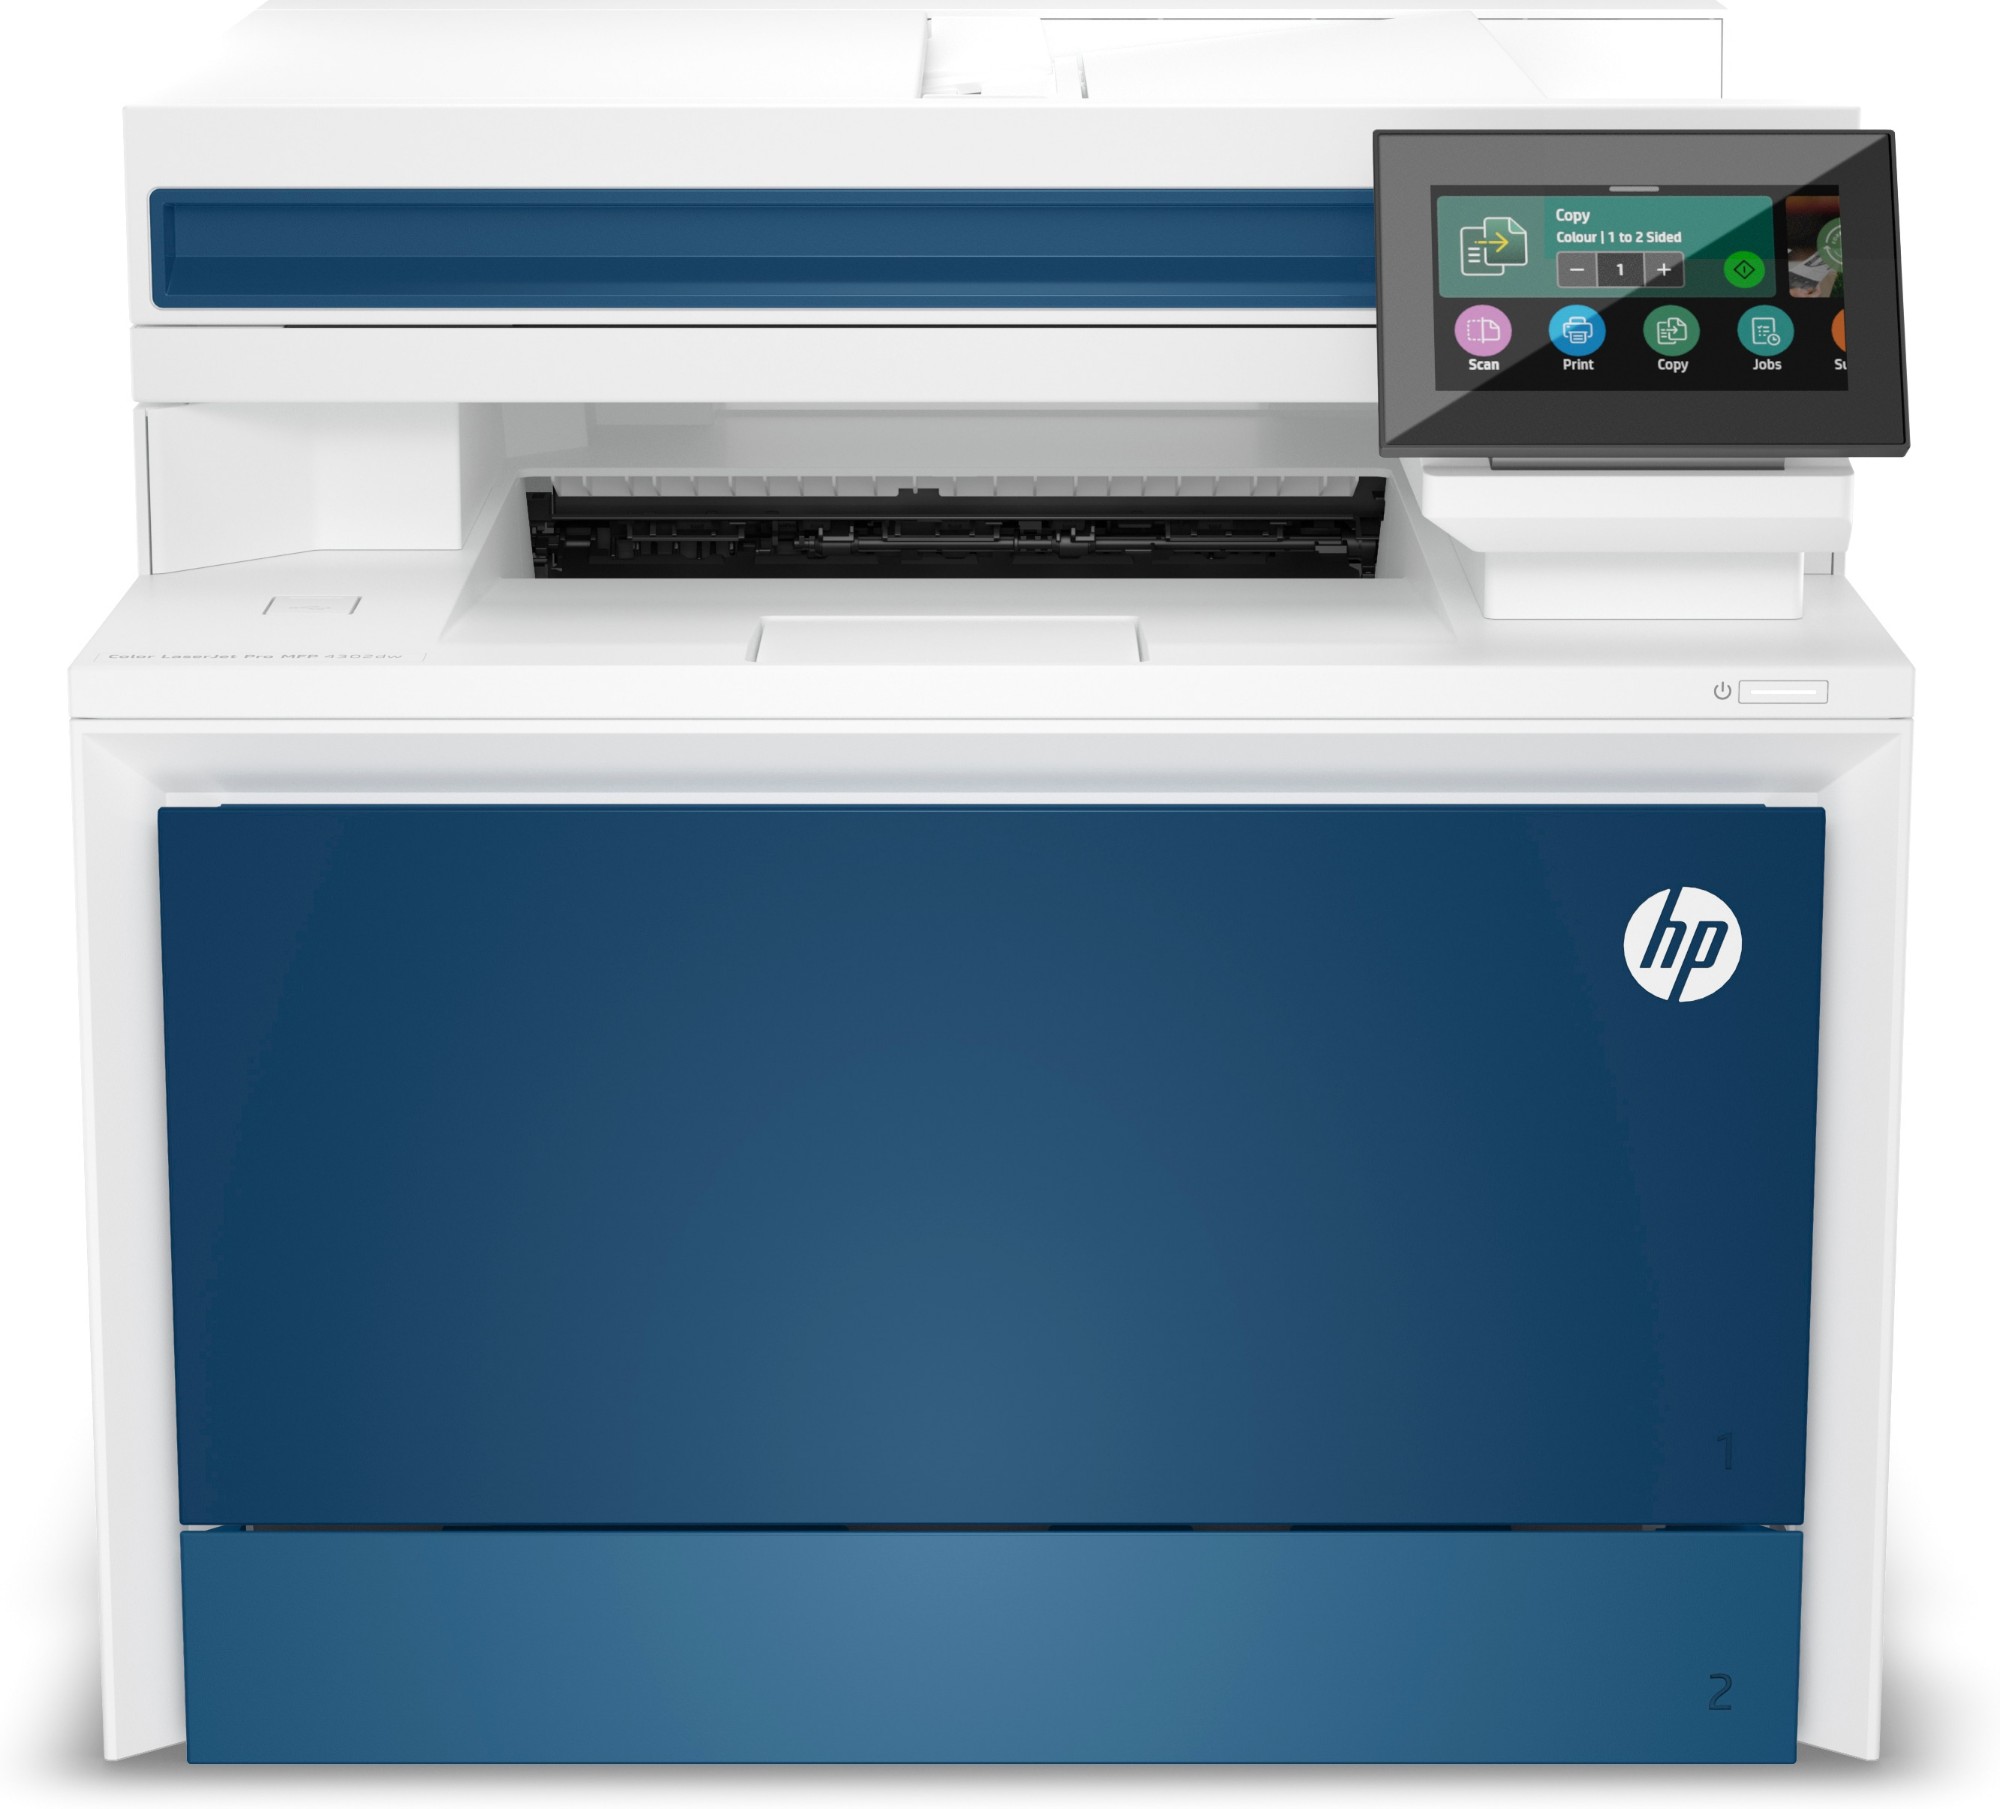 HP Color LaserJet Pro MFP 4302dw Printer, Color, Printer for Small medium business, Print, copy, scan, Wireless; Print from phone or tablet; Automatic document feeder